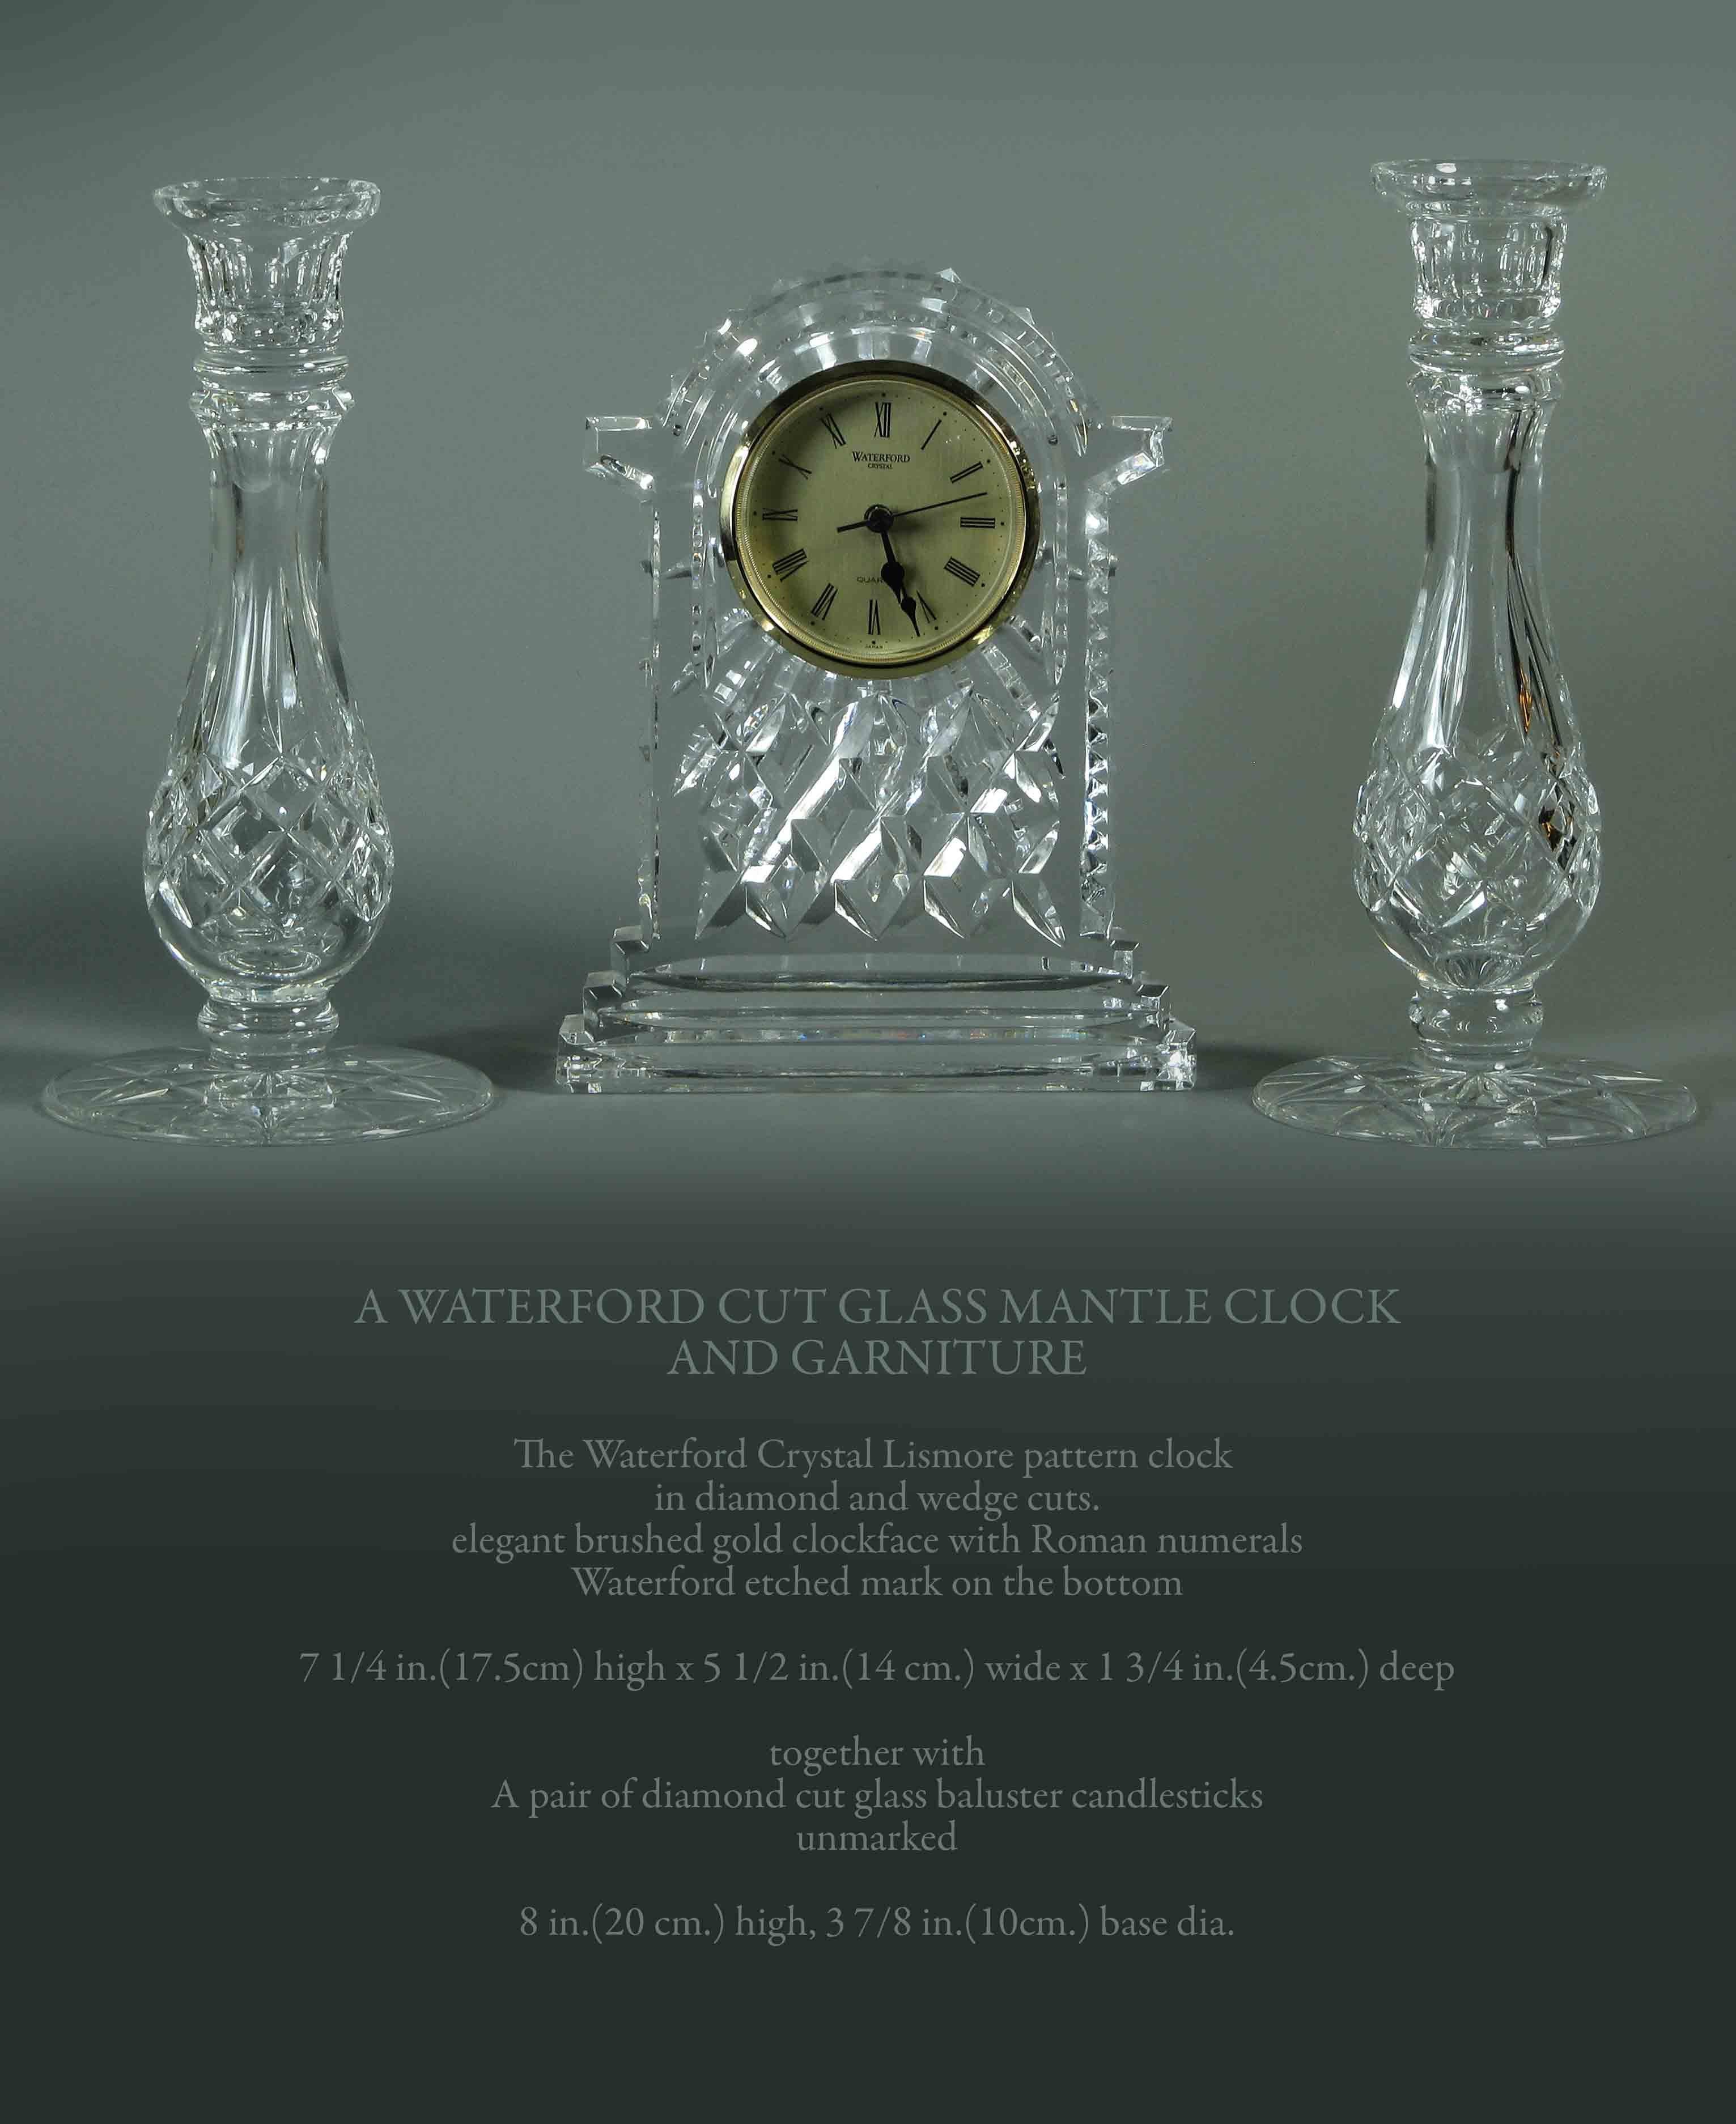 A WATERFORD CUT GLASS MANTLE CLOCK
AND GARNITURE

The Waterford Crystal Lismore pattern clock 
in diamond and wedge cuts.
elegant brushed gold clockface with Roman numerals
Waterford etched mark on the bottom.

7 1/4 in.(17.5cm) high.
 5